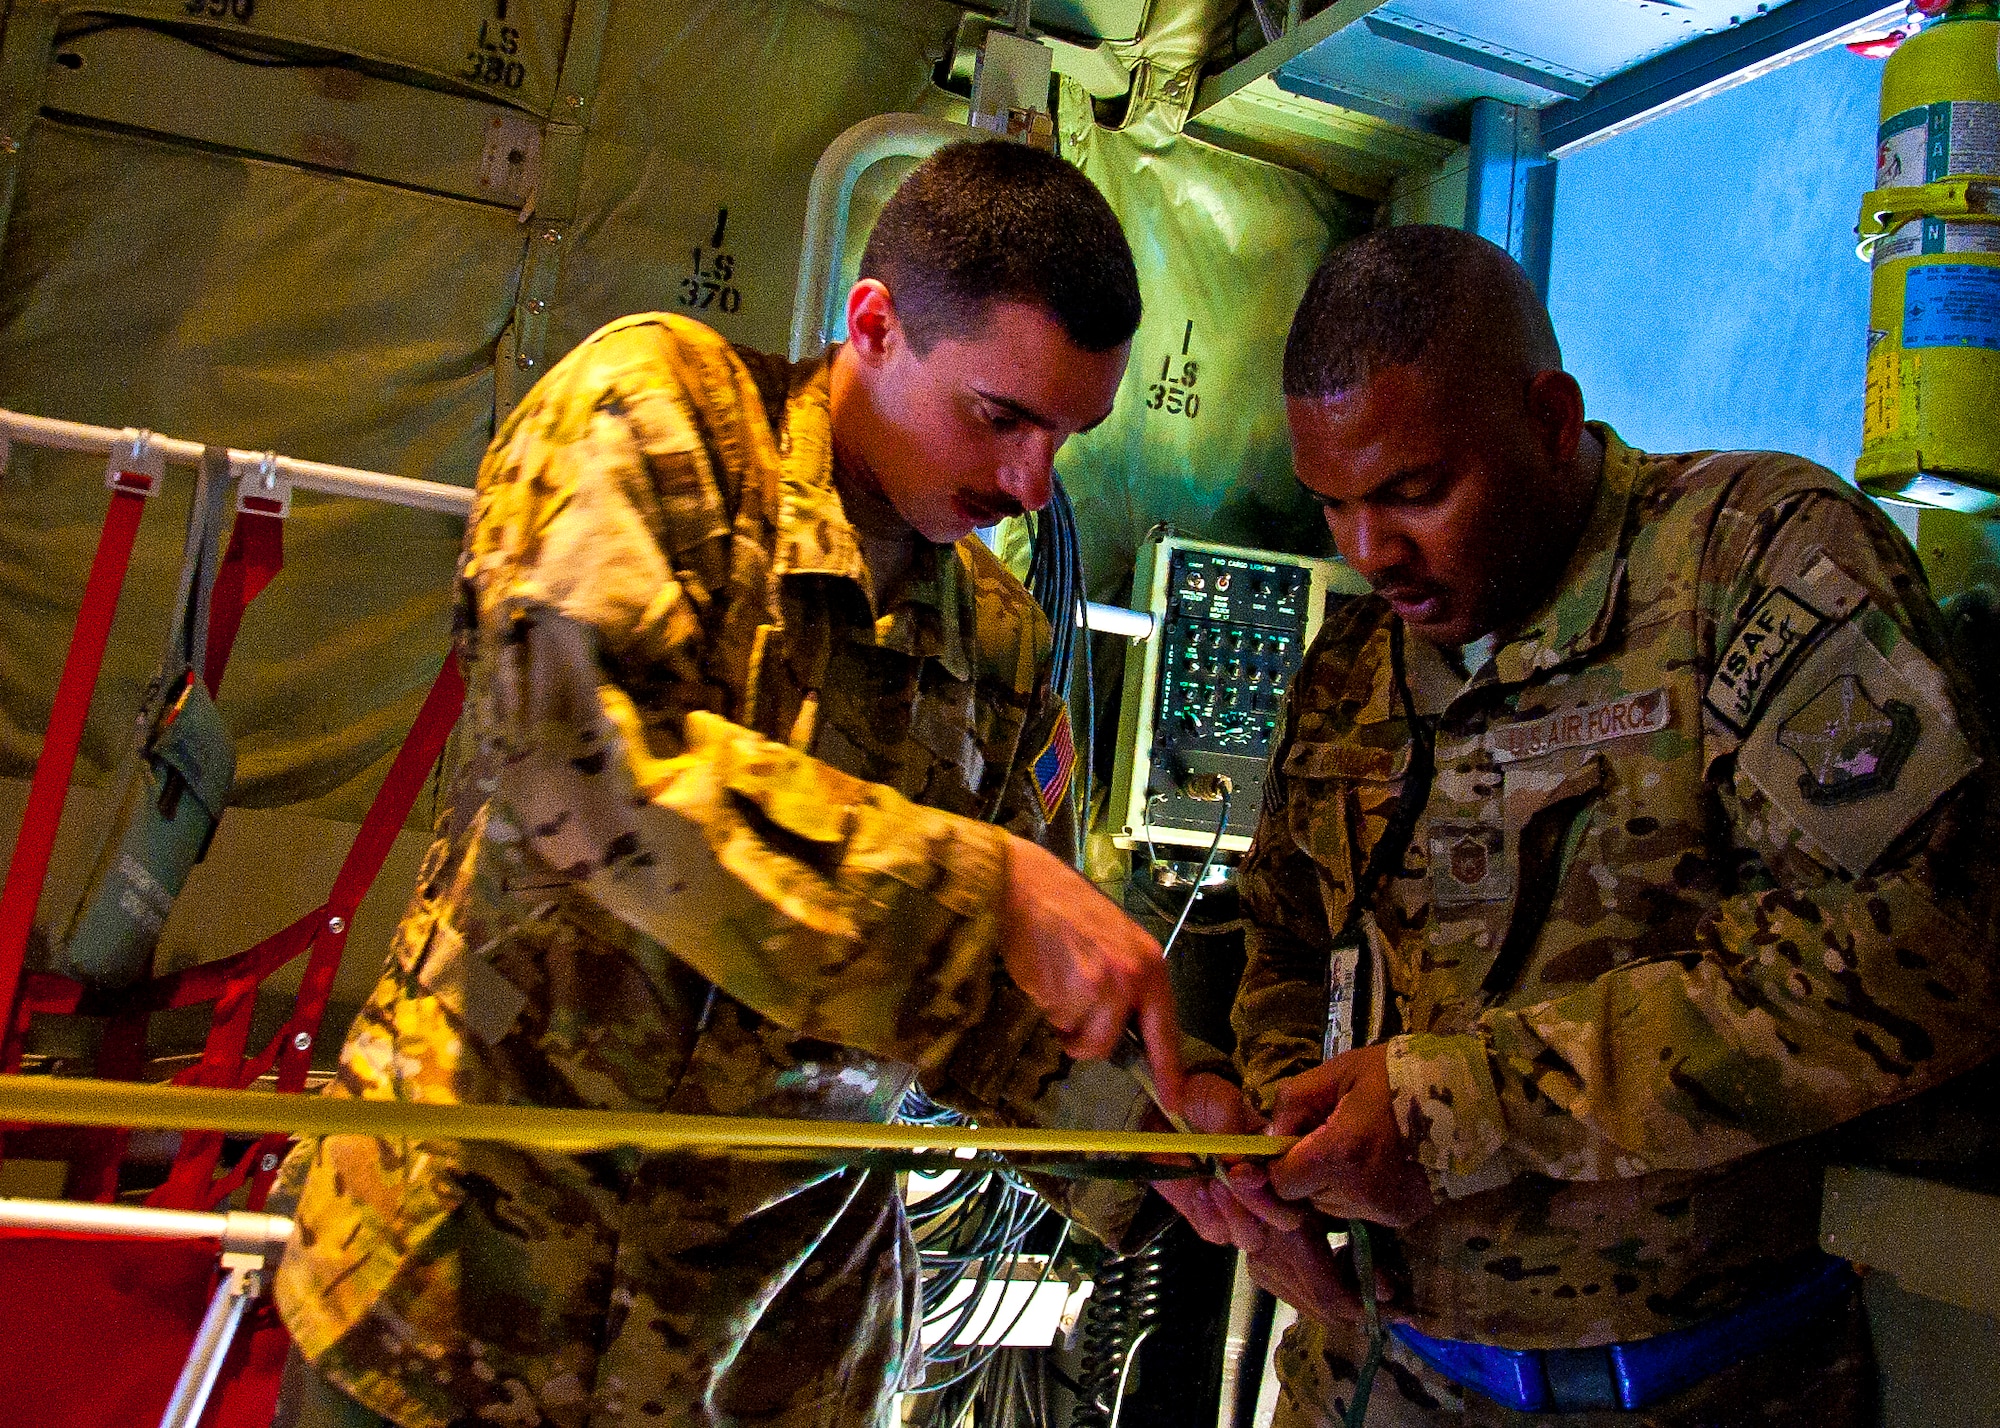 (Right) Master Sgt. DeMond Connors holds the measuring tape while Airman 1st Class Justin McKenzie cuts a length of 550 cord to tie together bundles on a C-130J Hercules April 29. Both Airmen are with the 772nd Expeditionary Airlift Squadron and were securing the bundles as part of Extracted Container Delivery System, a new, more accurate, method of airdrop designed to pull the bundles out of the aircraft faster. Connors and McKenzie are both deployed from Little Rock Air Force Base, Ark. (U.S. Air Force photo by Senior Airman Scott Saldukas)